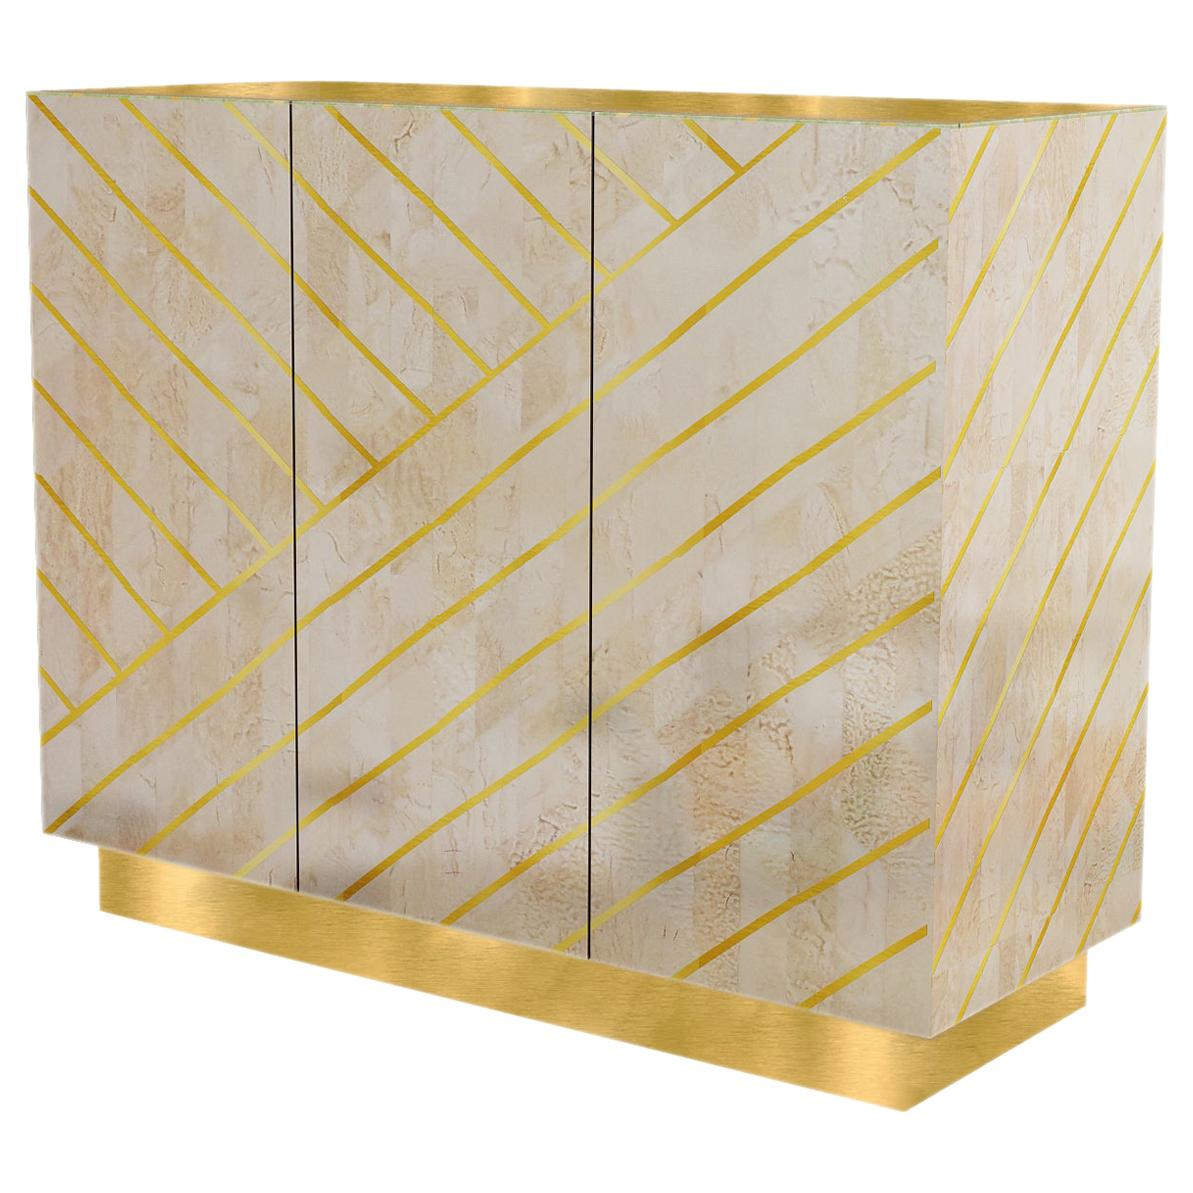 Nesso Beige and PinkSmall Sideboard with Brass Inlay by Matteo Cibic